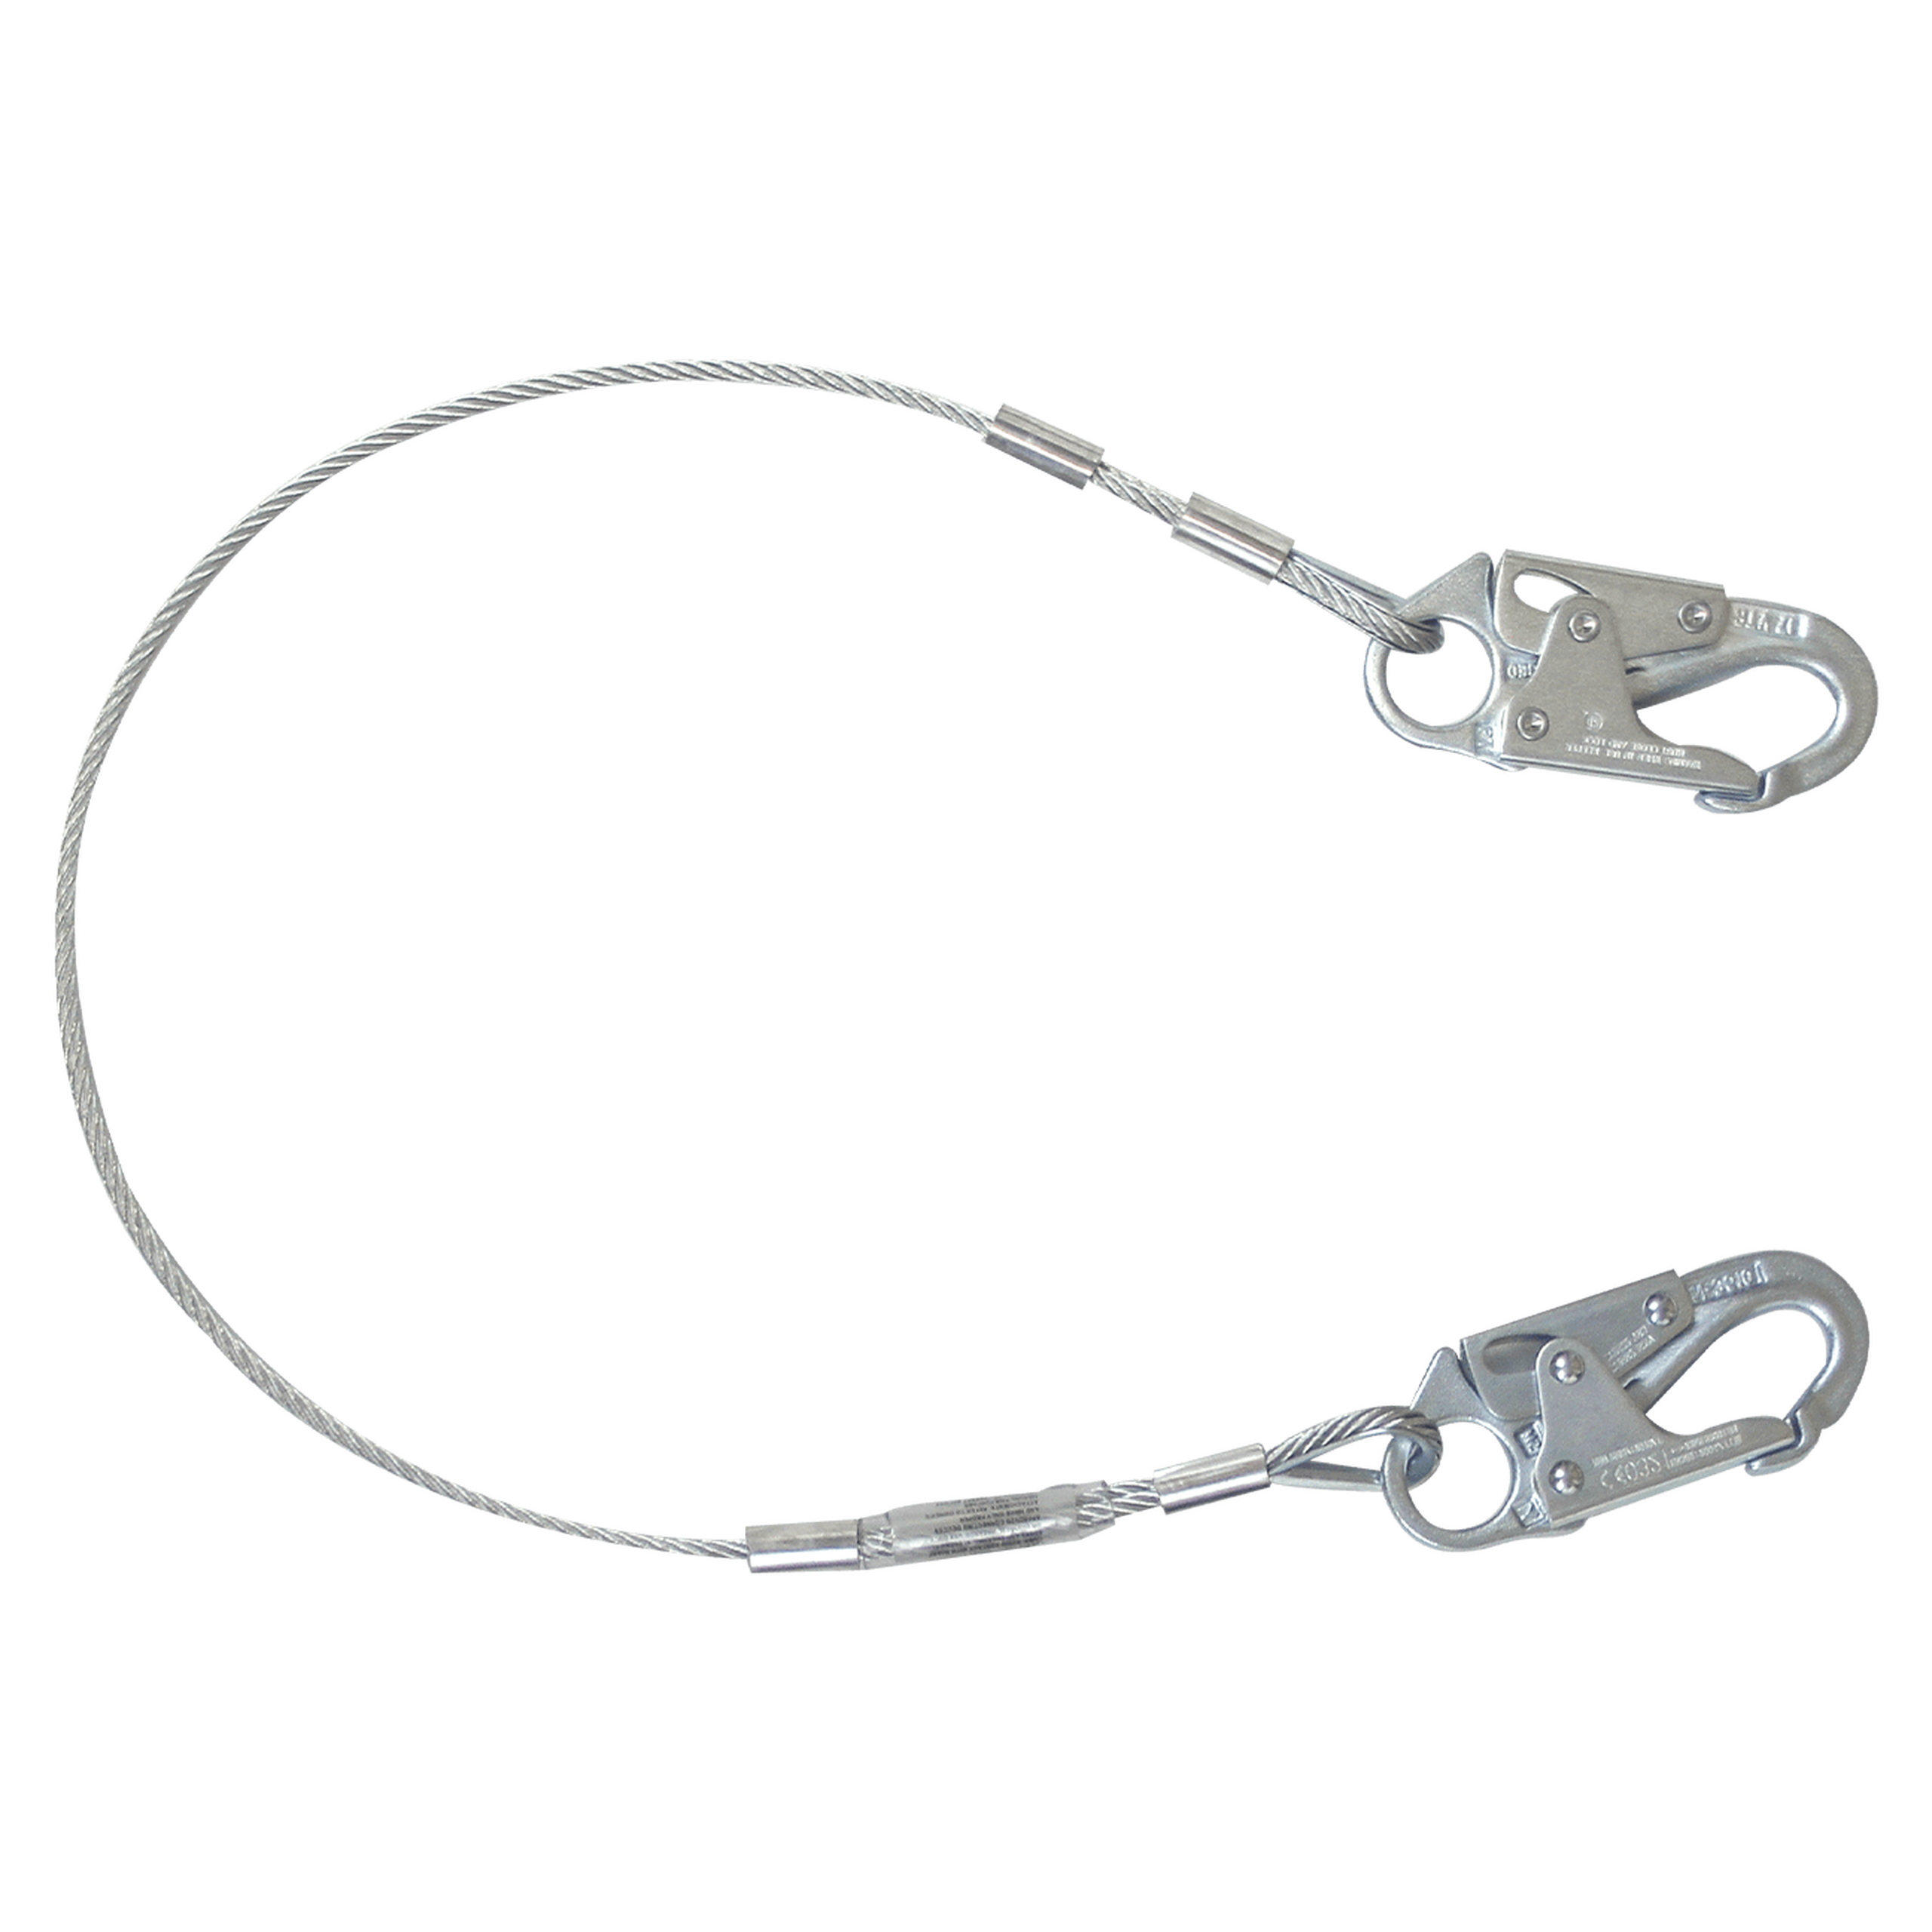 FallTech 830636 3' Cable Restraint Lanyard, Fixed-length with Steel Snap Hooks (each)